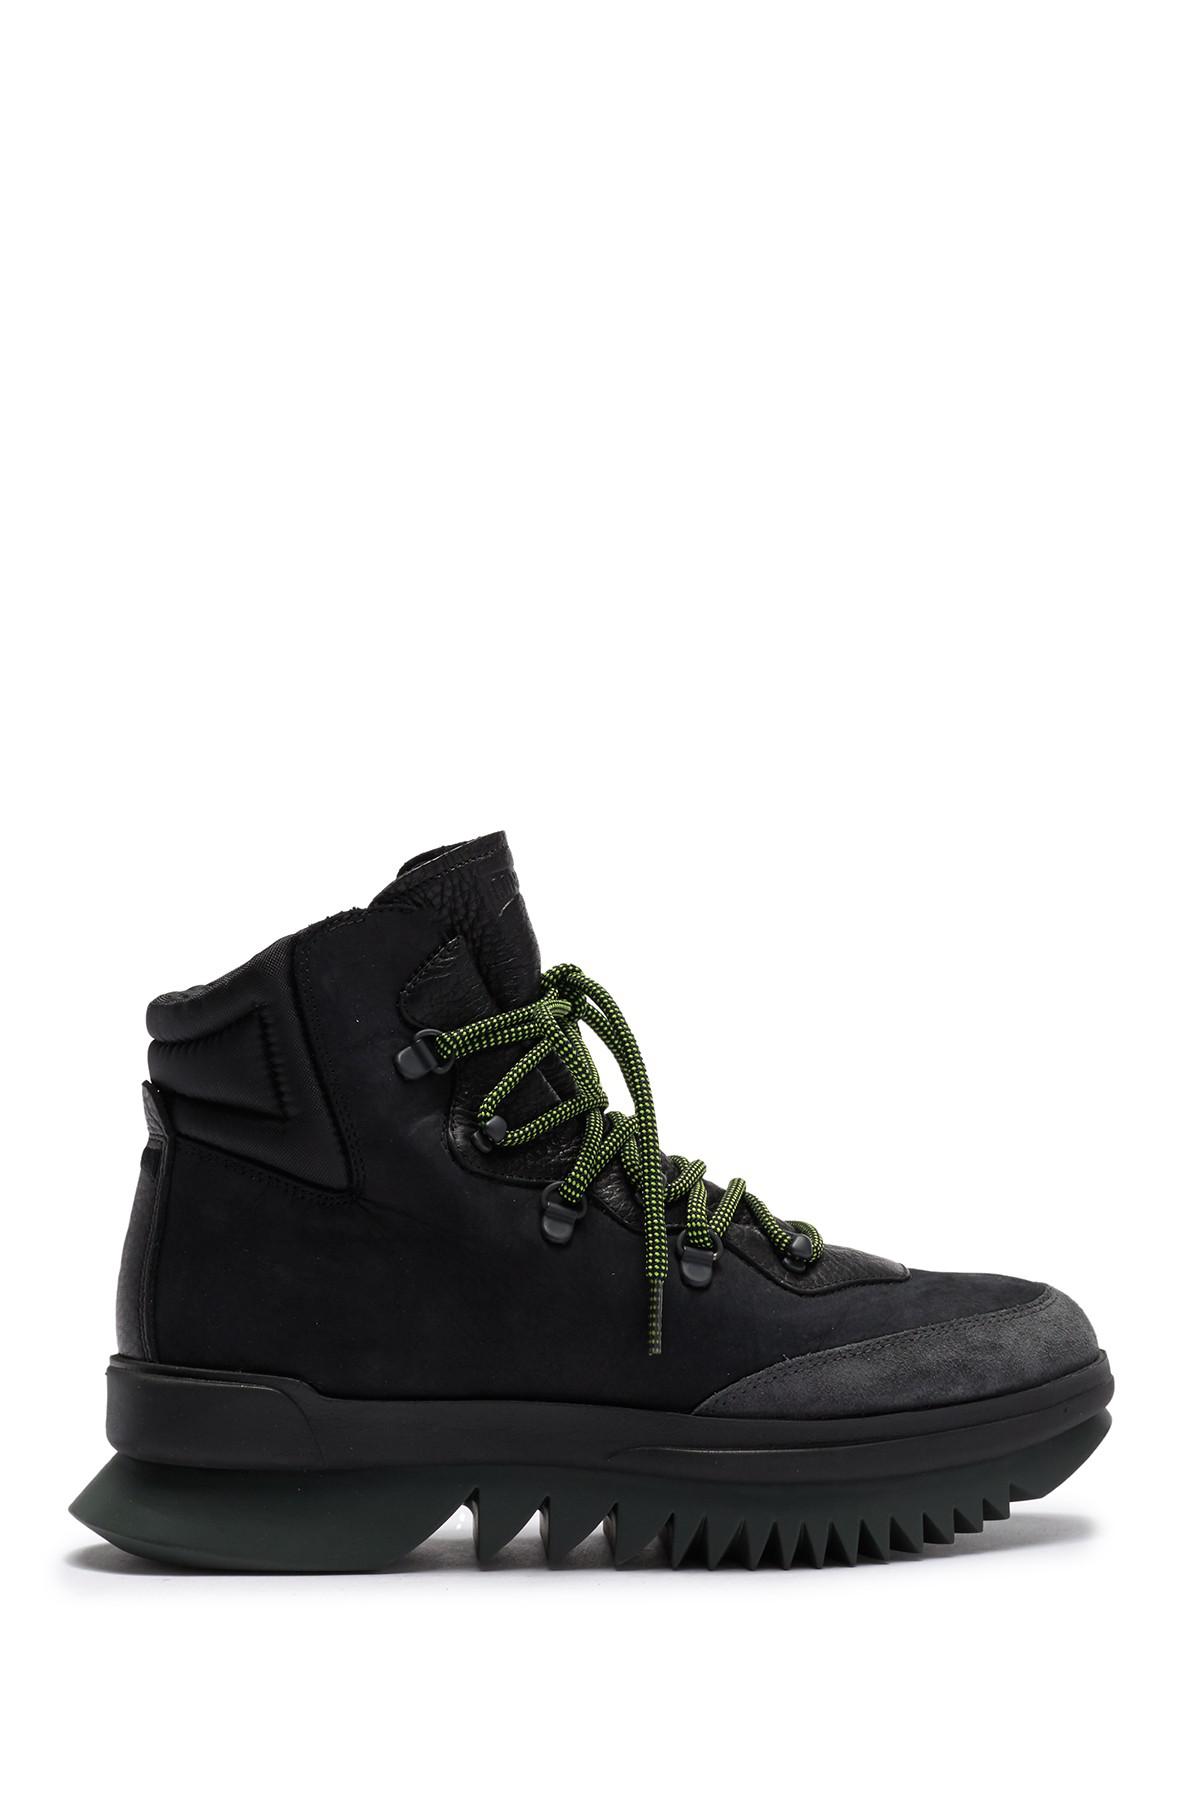 camper rex leather & suede boot